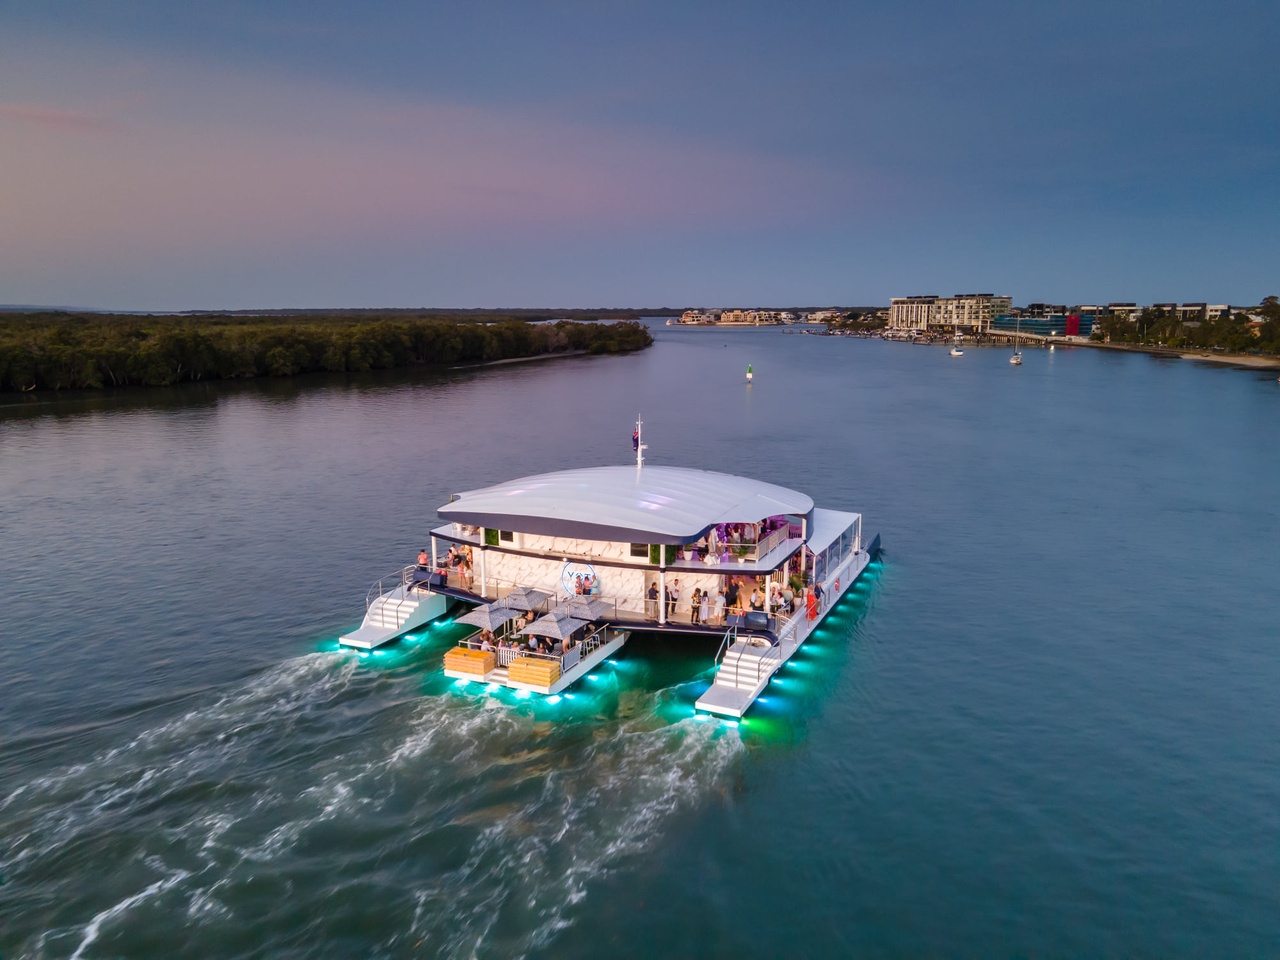 An image of a large YOT Club yacht with neon lights travelling down a river at dusk.